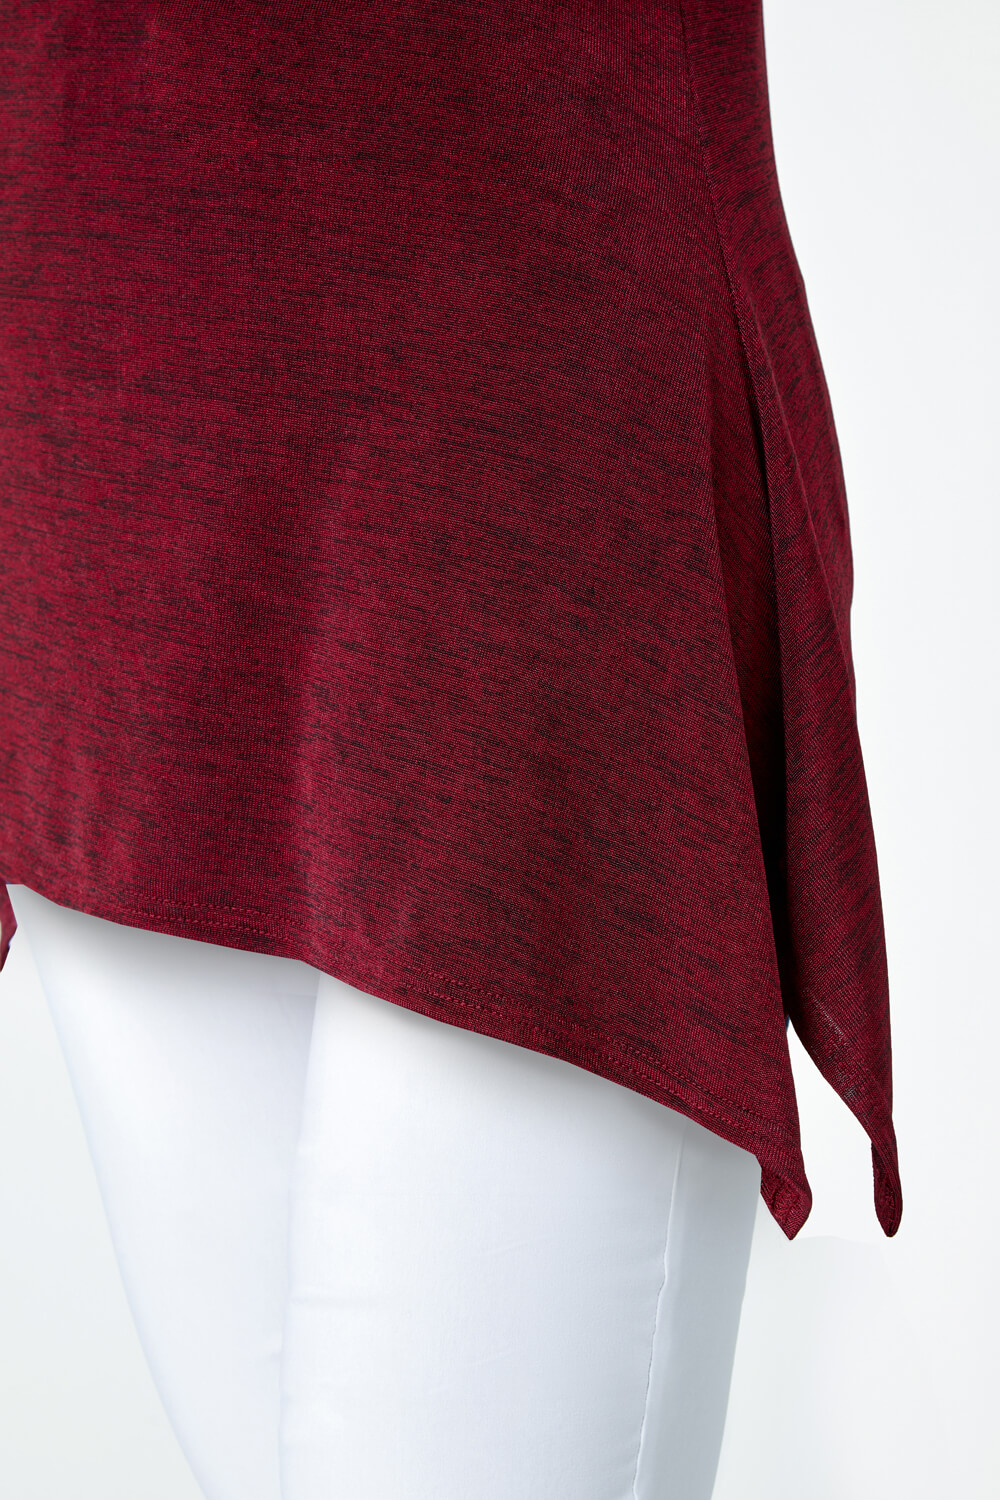 Red Marl Soft Stretch Top, Image 5 of 5